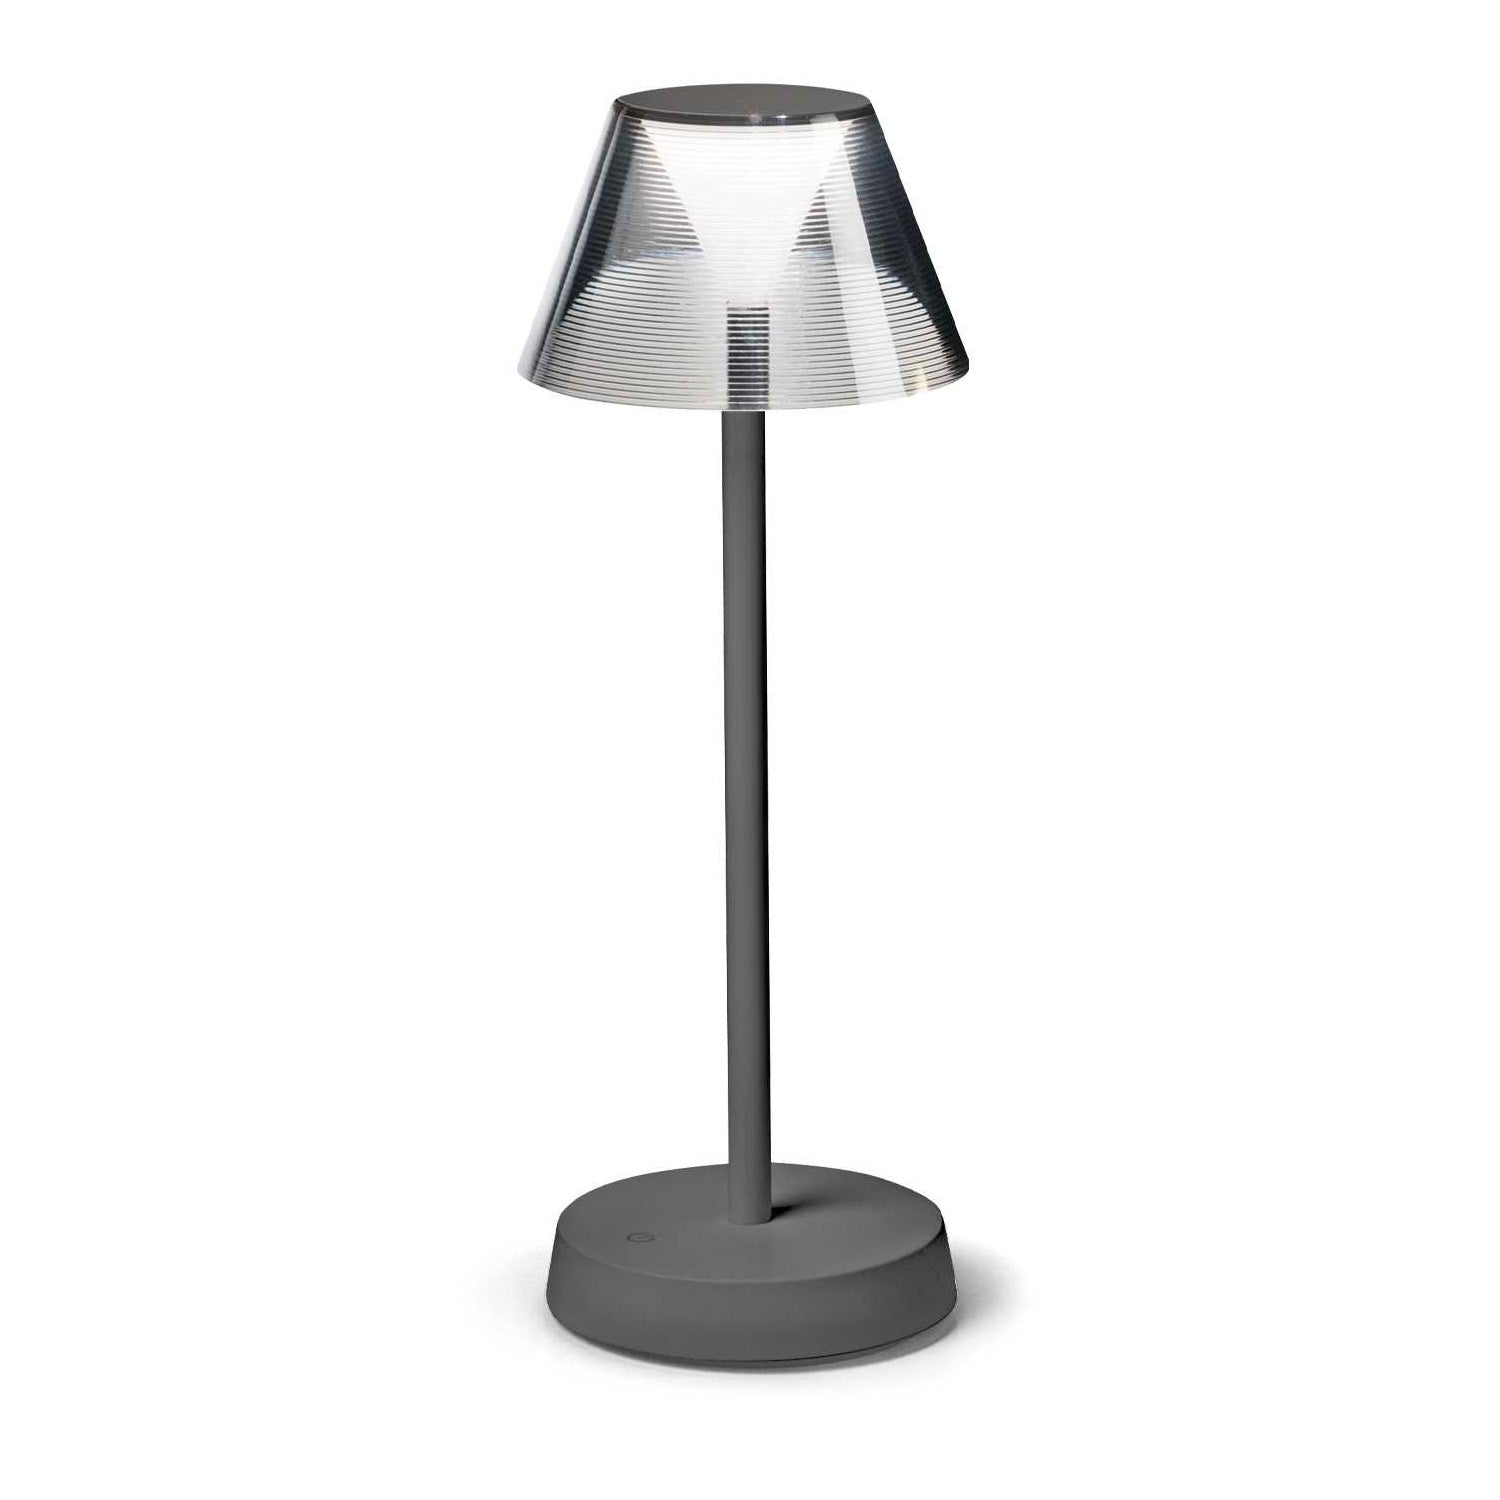 LOLITA - Portable cordless lamp with integrated LED